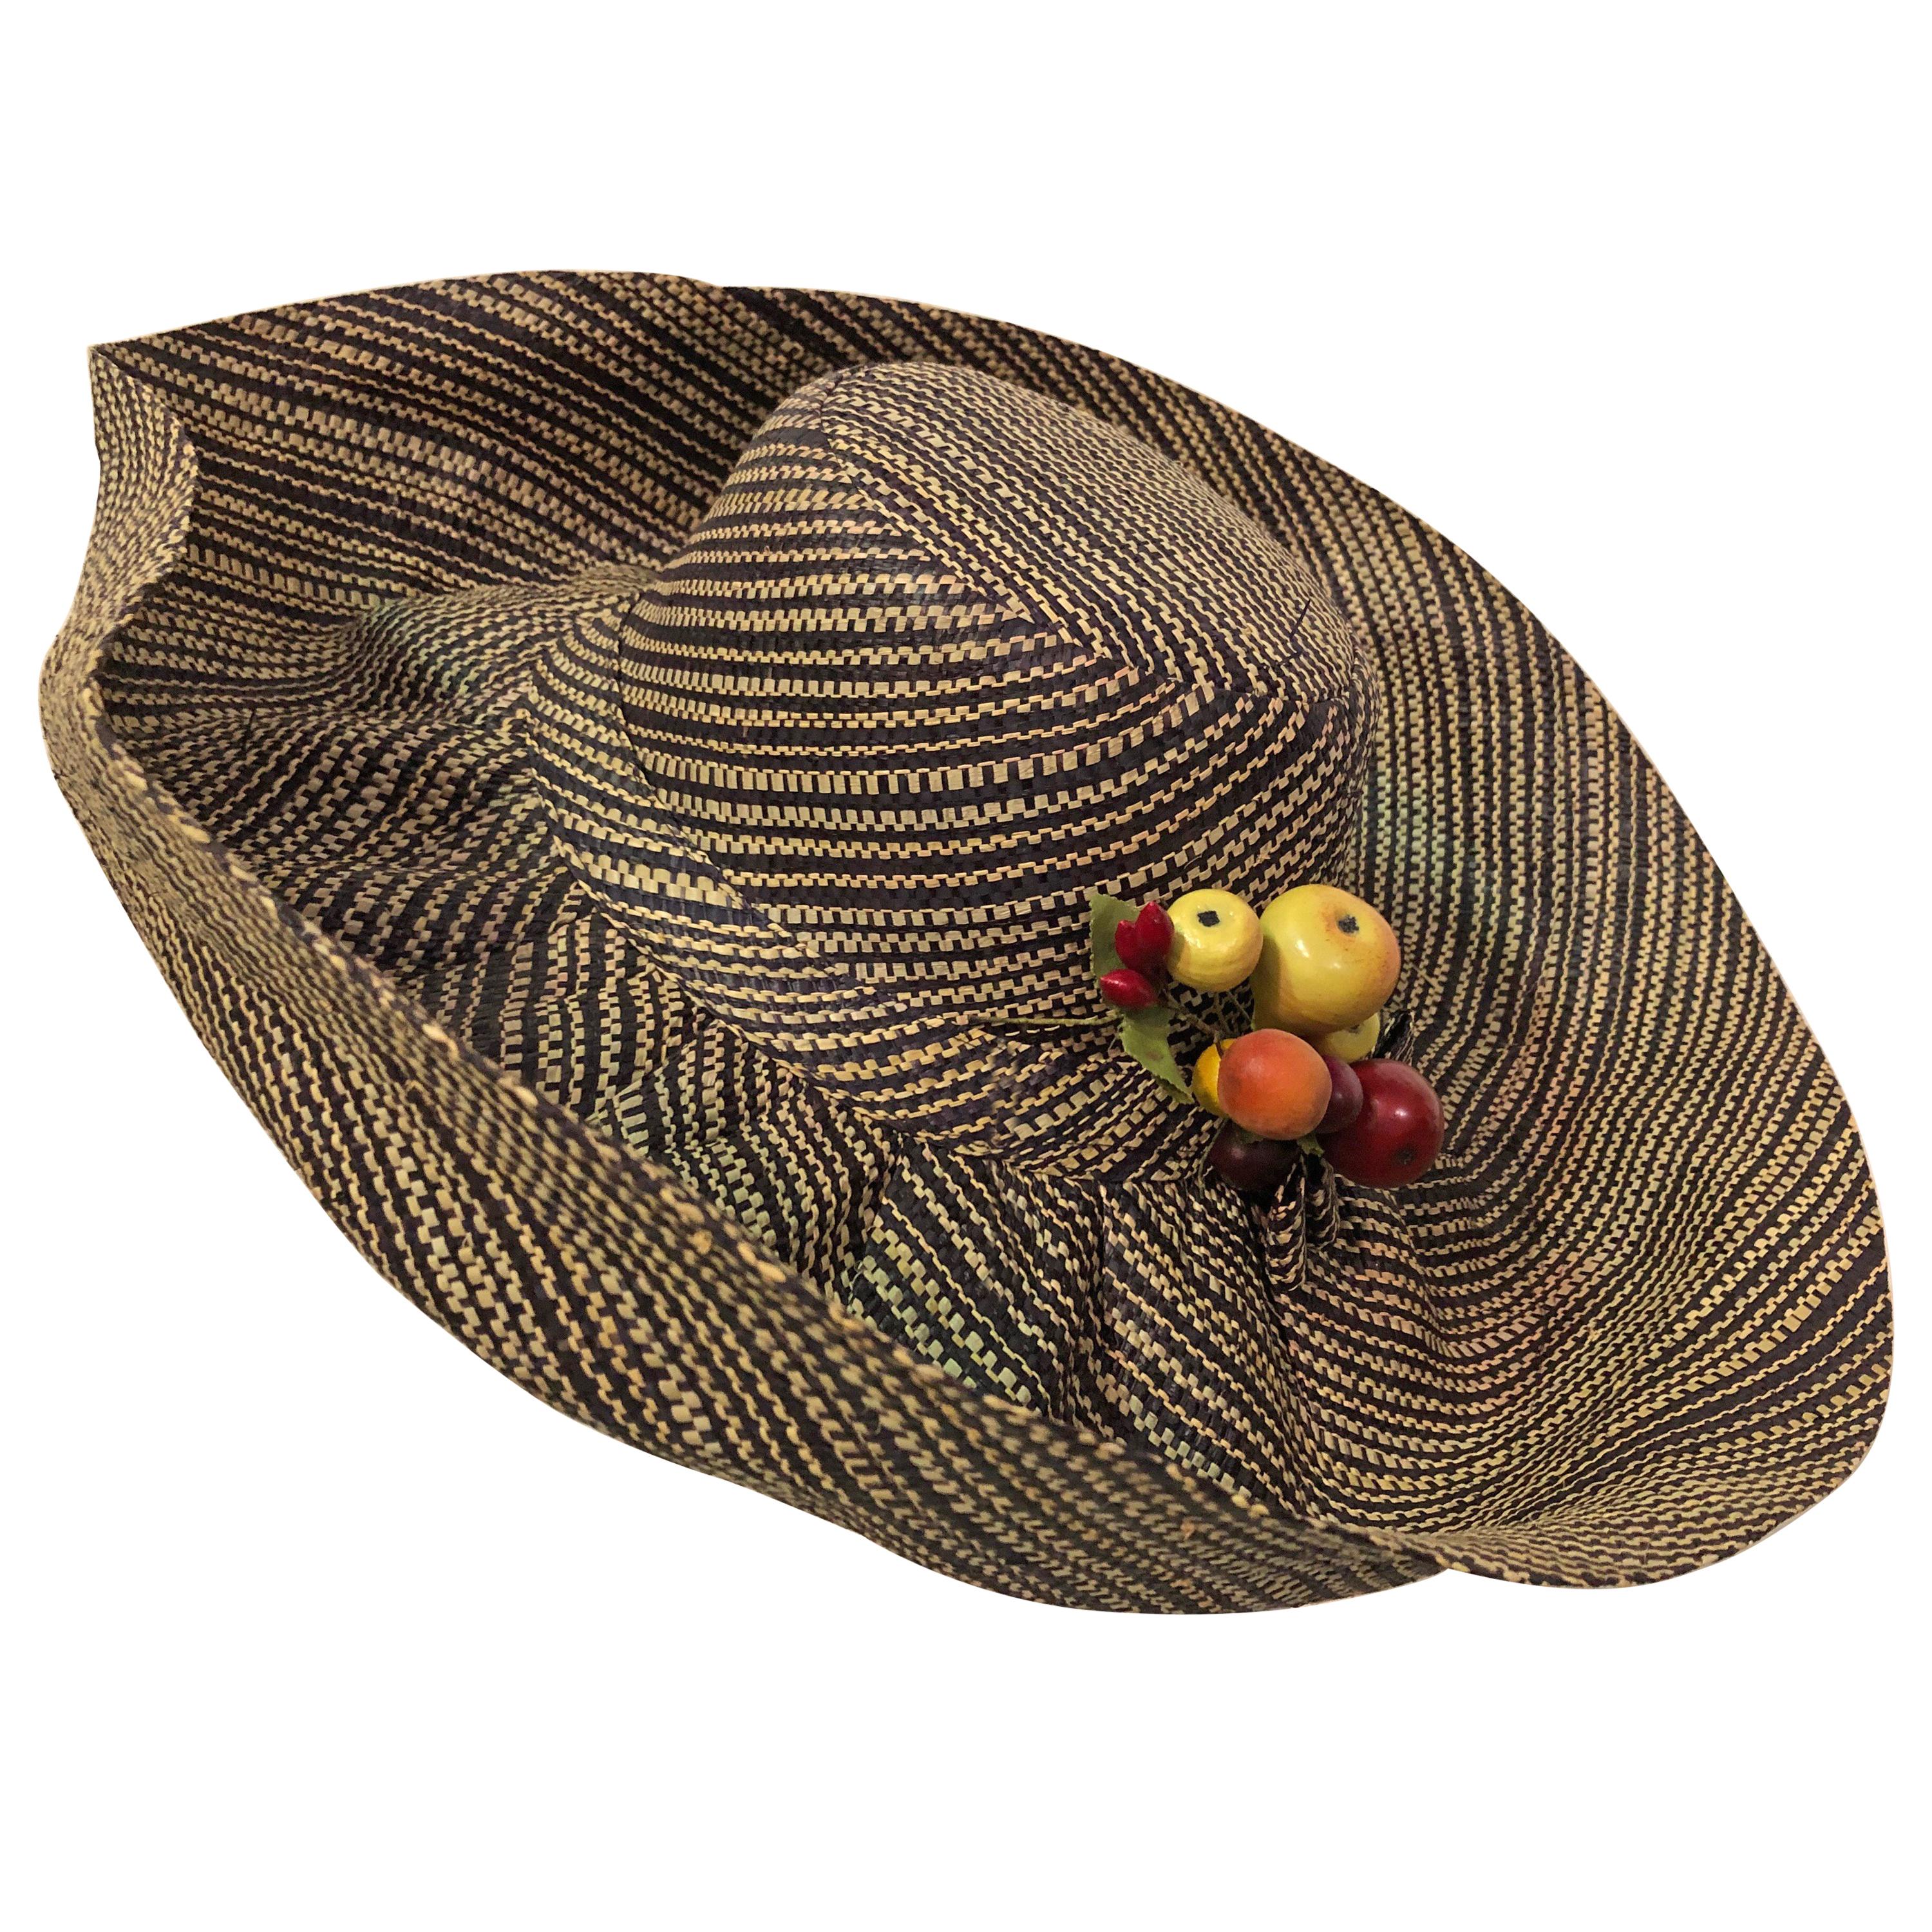 1960s Style Woven 2 Tone Straw Hat With Dramatic Brim & Vintage Fruit Corsage 